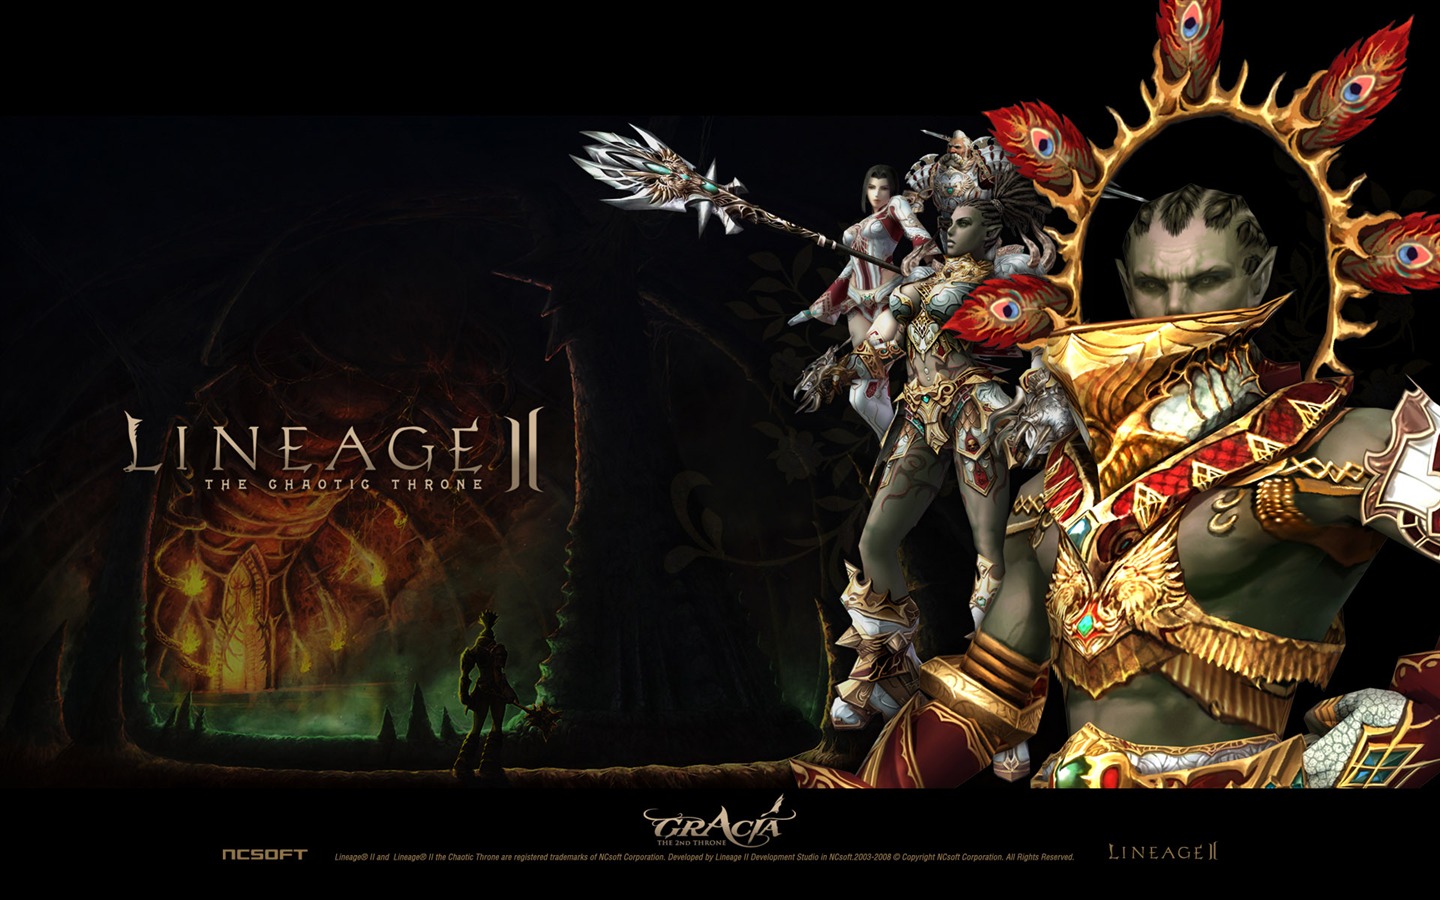 LINEAGE Ⅱ modeling HD gaming wallpapers #2 - 1440x900